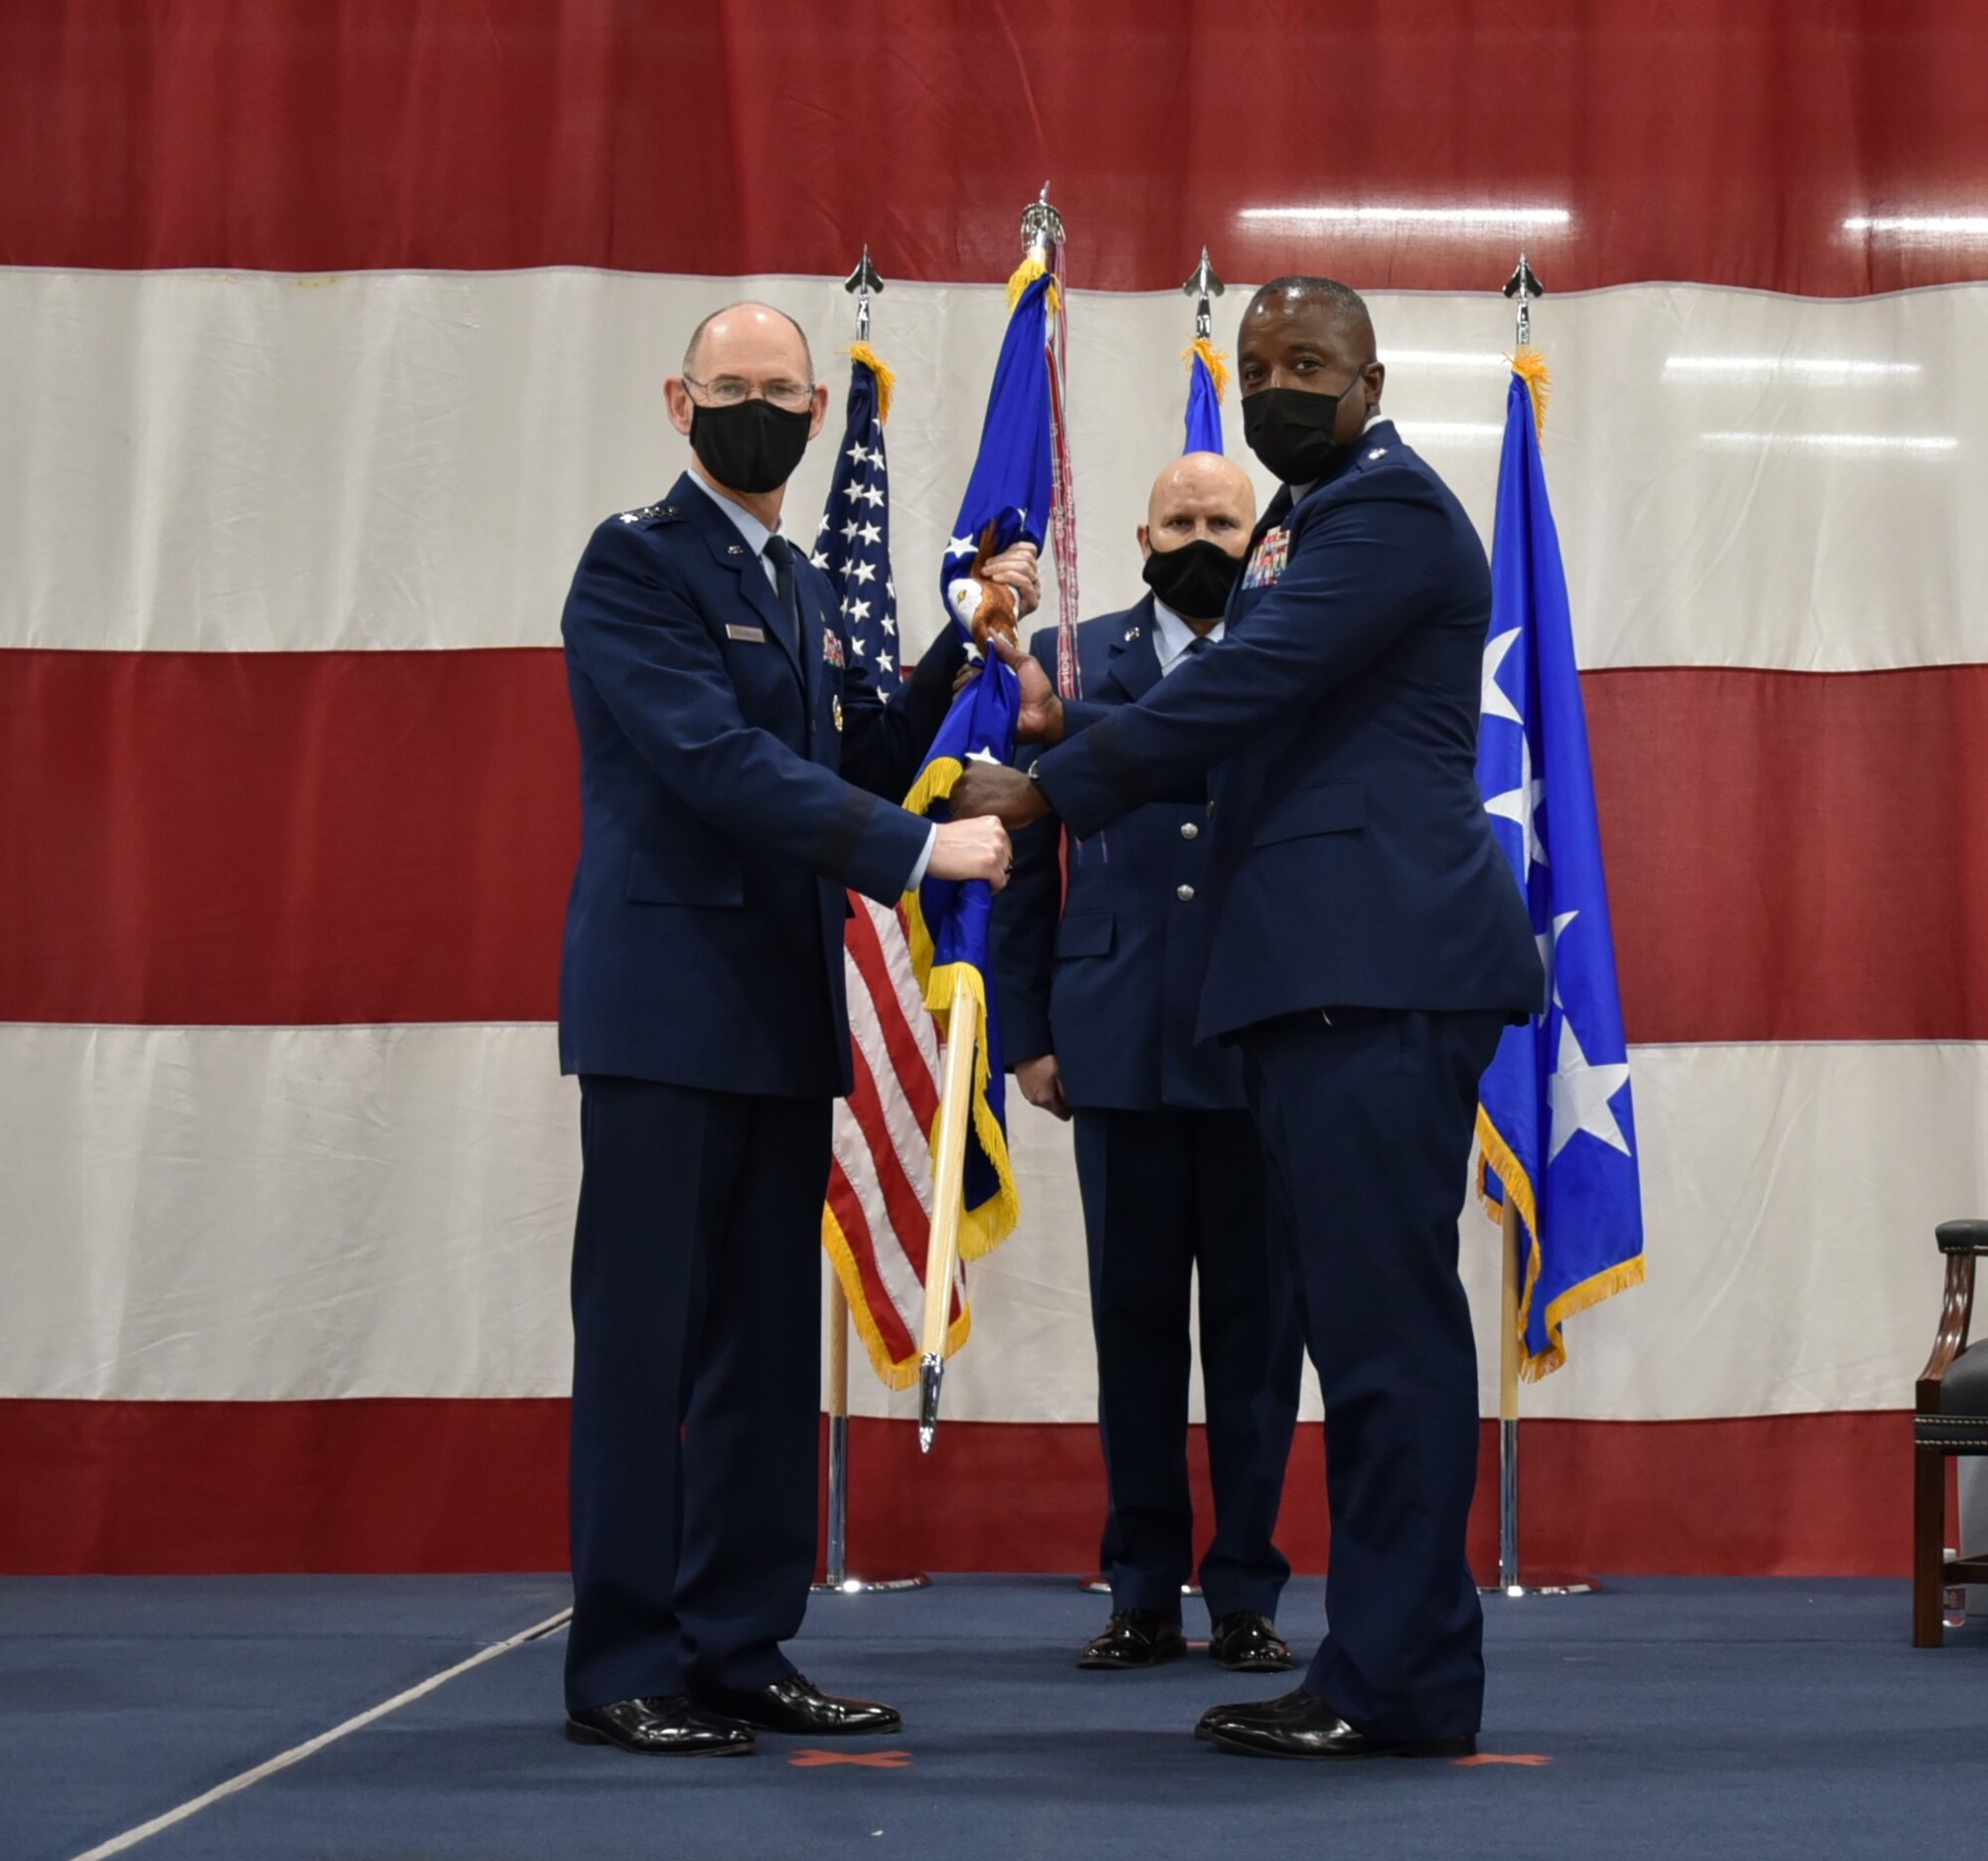 220815-F-UR719-4023
Gen. Duke Z. Richardson, commander, Air Force Materiel Command (left) holds the Air Force Sustainment Center provisional flag with Lt. Gen. Stacey T. Hawkins (right) during a change of command ceremony at Tinker Air Force Base, Oklahoma, Aug. 15, 2022.